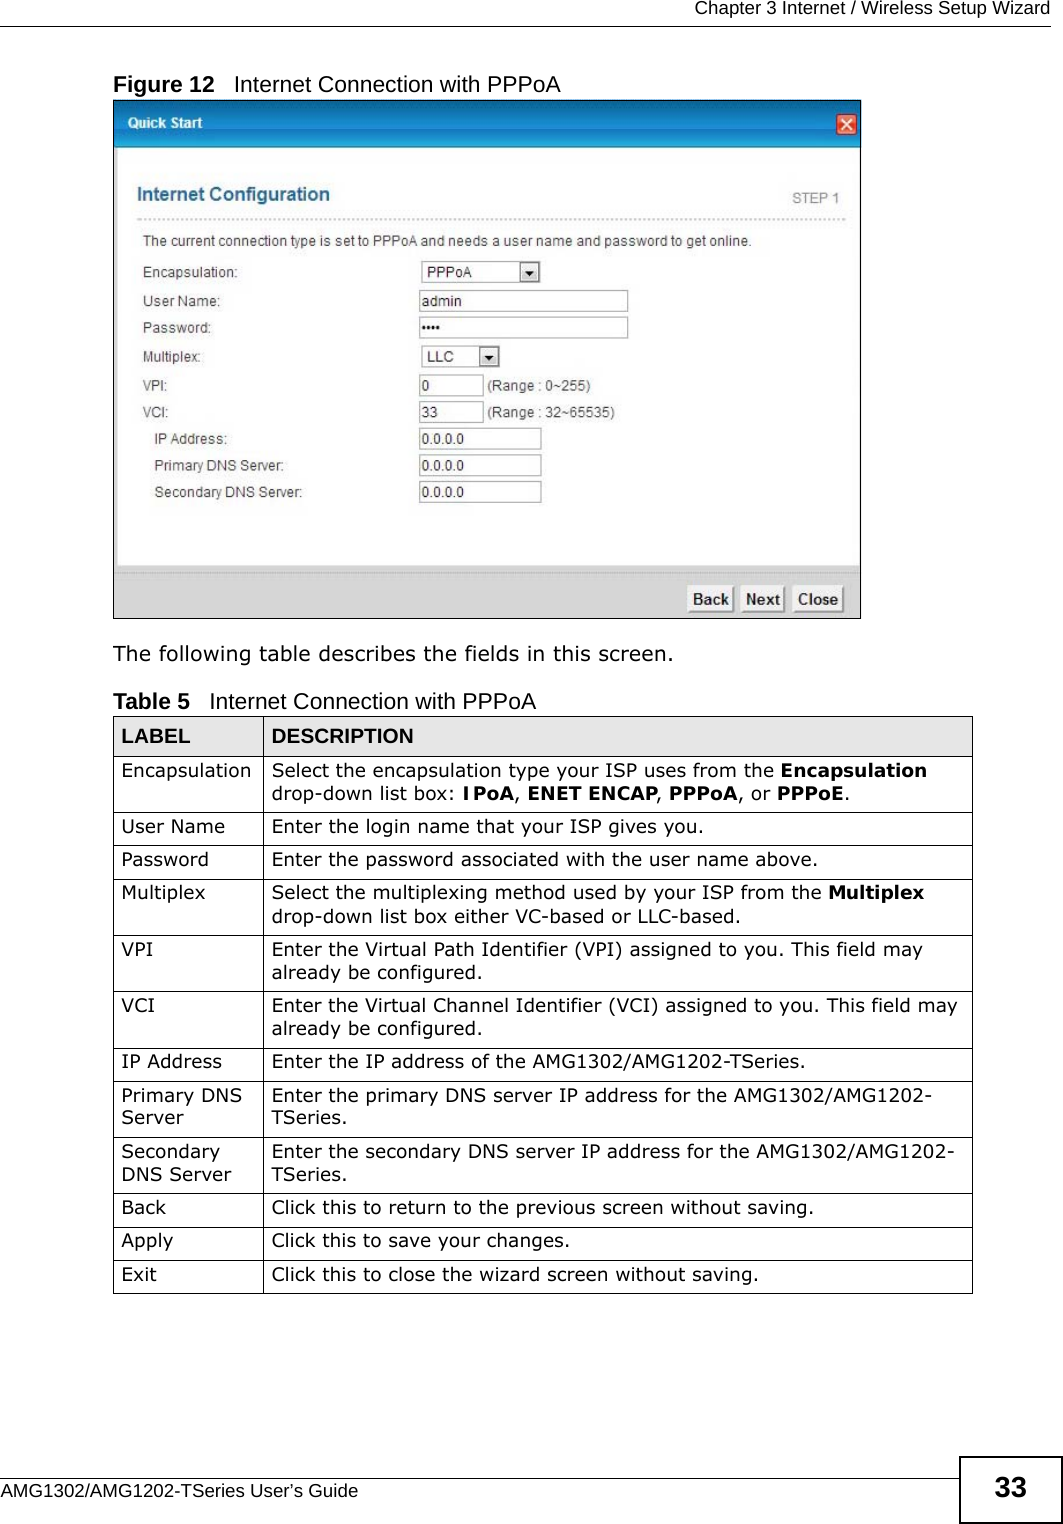  Chapter 3 Internet / Wireless Setup WizardAMG1302/AMG1202-TSeries User’s Guide 33Figure 12   Internet Connection with PPPoAThe following table describes the fields in this screen.Table 5   Internet Connection with PPPoALABEL DESCRIPTIONEncapsulation Select the encapsulation type your ISP uses from the Encapsulation drop-down list box: IPoA, ENET ENCAP, PPPoA, or PPPoE.User Name Enter the login name that your ISP gives you. Password Enter the password associated with the user name above.Multiplex Select the multiplexing method used by your ISP from the Multiplex drop-down list box either VC-based or LLC-based. VPI Enter the Virtual Path Identifier (VPI) assigned to you. This field may already be configured.VCI Enter the Virtual Channel Identifier (VCI) assigned to you. This field may already be configured.IP Address Enter the IP address of the AMG1302/AMG1202-TSeries. Primary DNS ServerEnter the primary DNS server IP address for the AMG1302/AMG1202-TSeries.Secondary DNS ServerEnter the secondary DNS server IP address for the AMG1302/AMG1202-TSeries.Back Click this to return to the previous screen without saving.Apply Click this to save your changes.Exit Click this to close the wizard screen without saving.